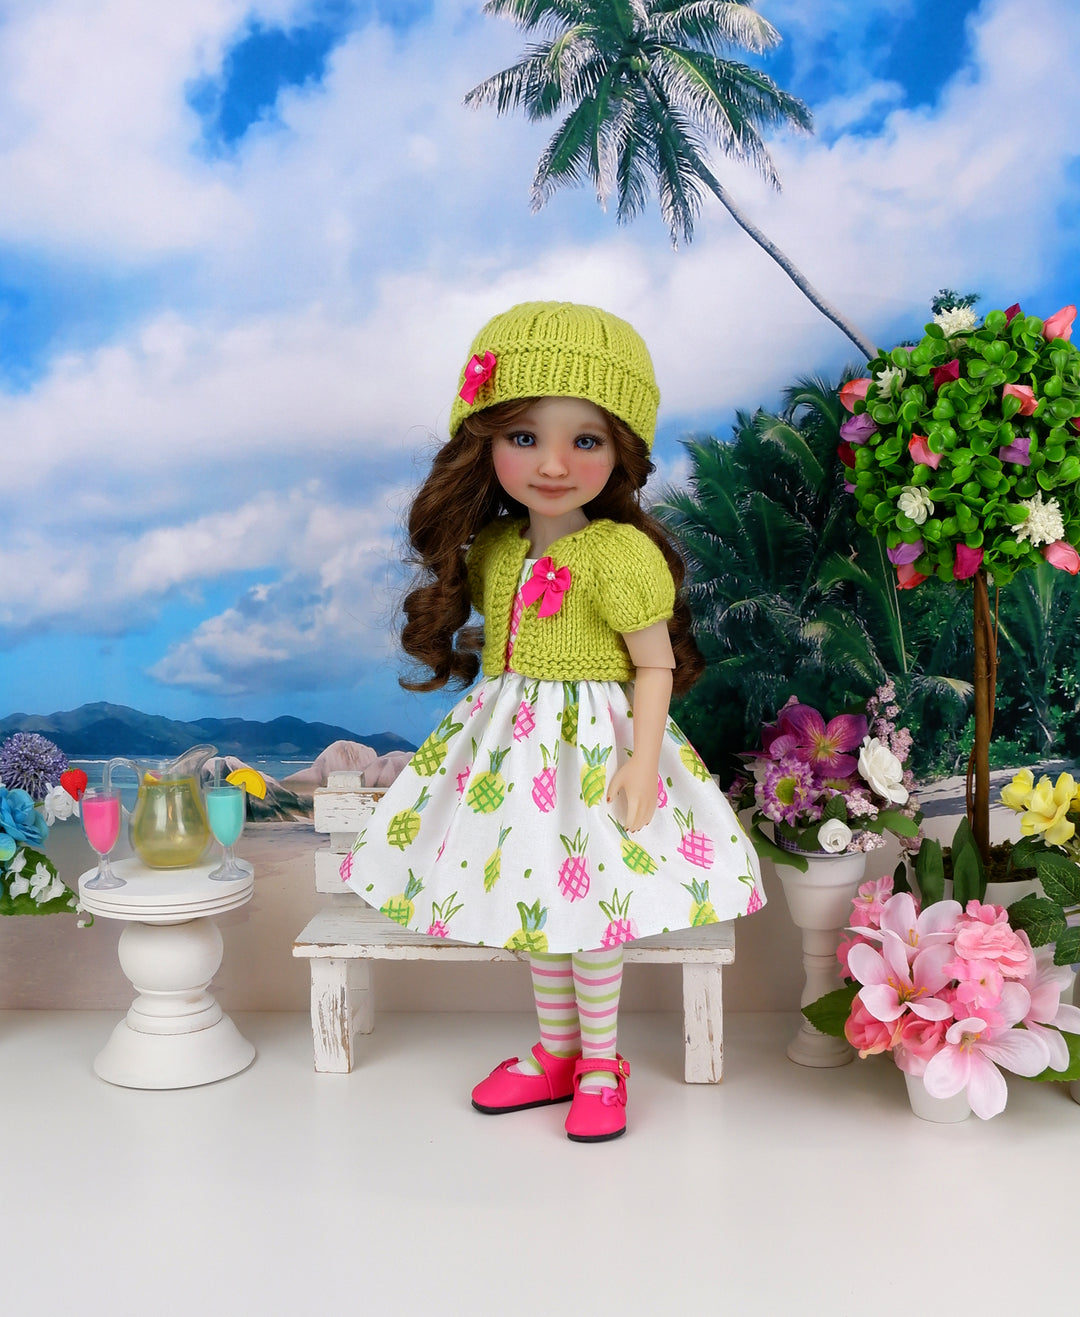 Tropical Pineapple - dress and sweater set with shoes for Ruby Red Fashion Friends doll